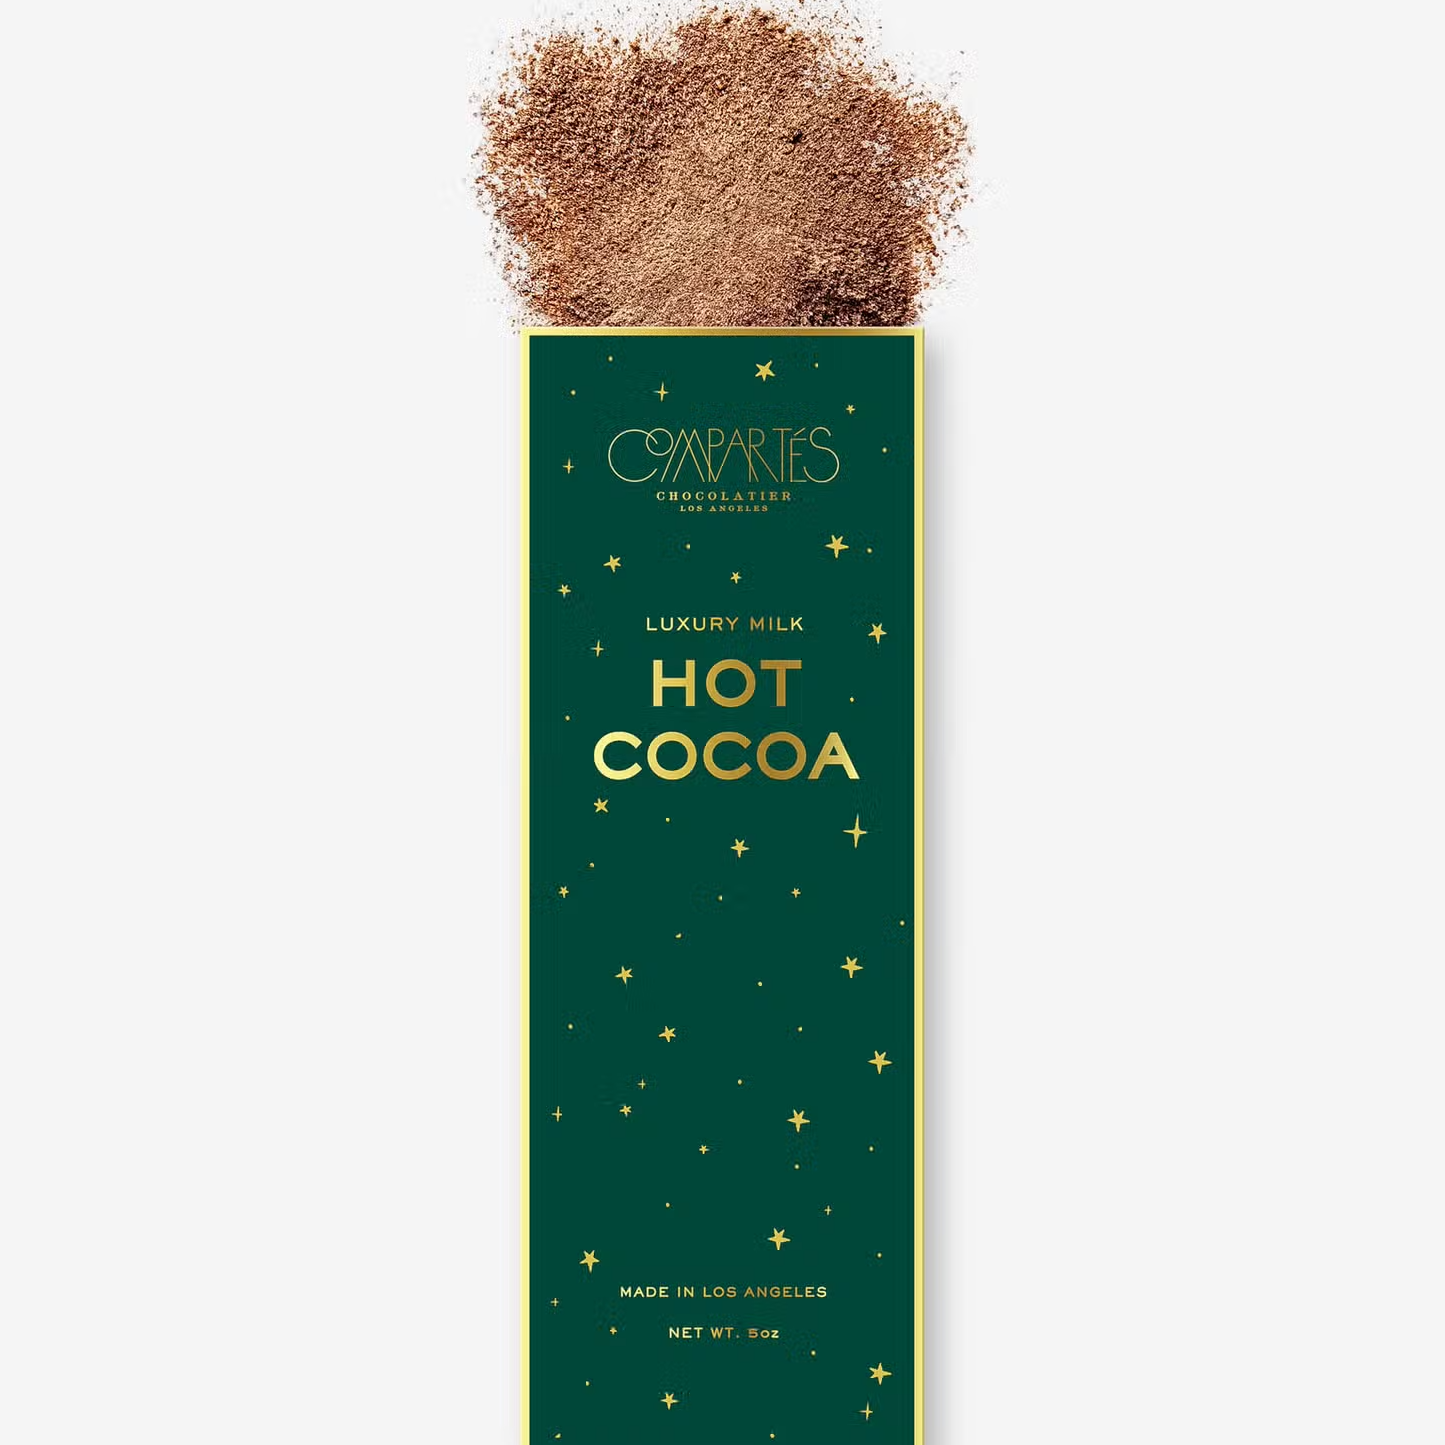 Emerald green box with gold accents on the front. Box reads "Luxury Hot Cocoa" with Compartes logo near the top in the center. Hot cocoa powder displayed on top of the box